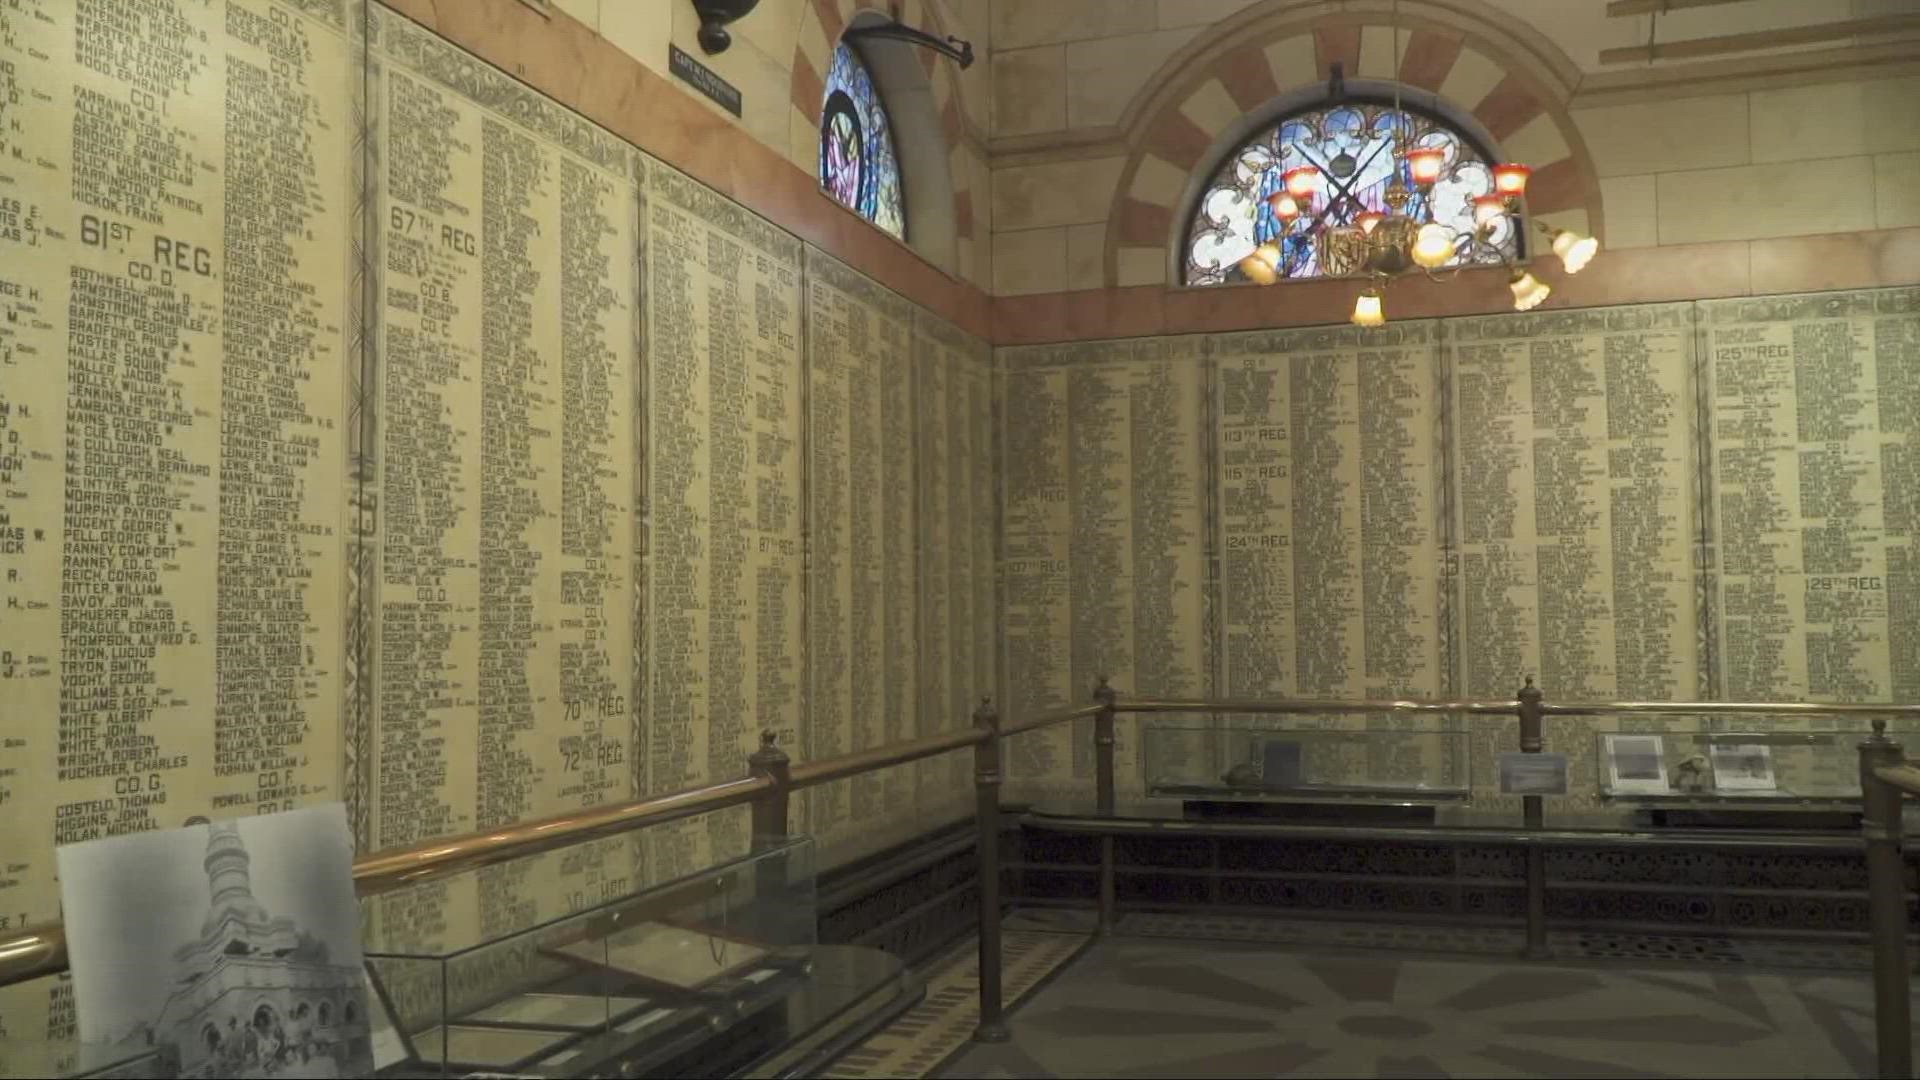 Standing in the heart of Public Square in Cleveland, some visitors may not know that inside the monument, they can find a memorial room, serving as a museum.